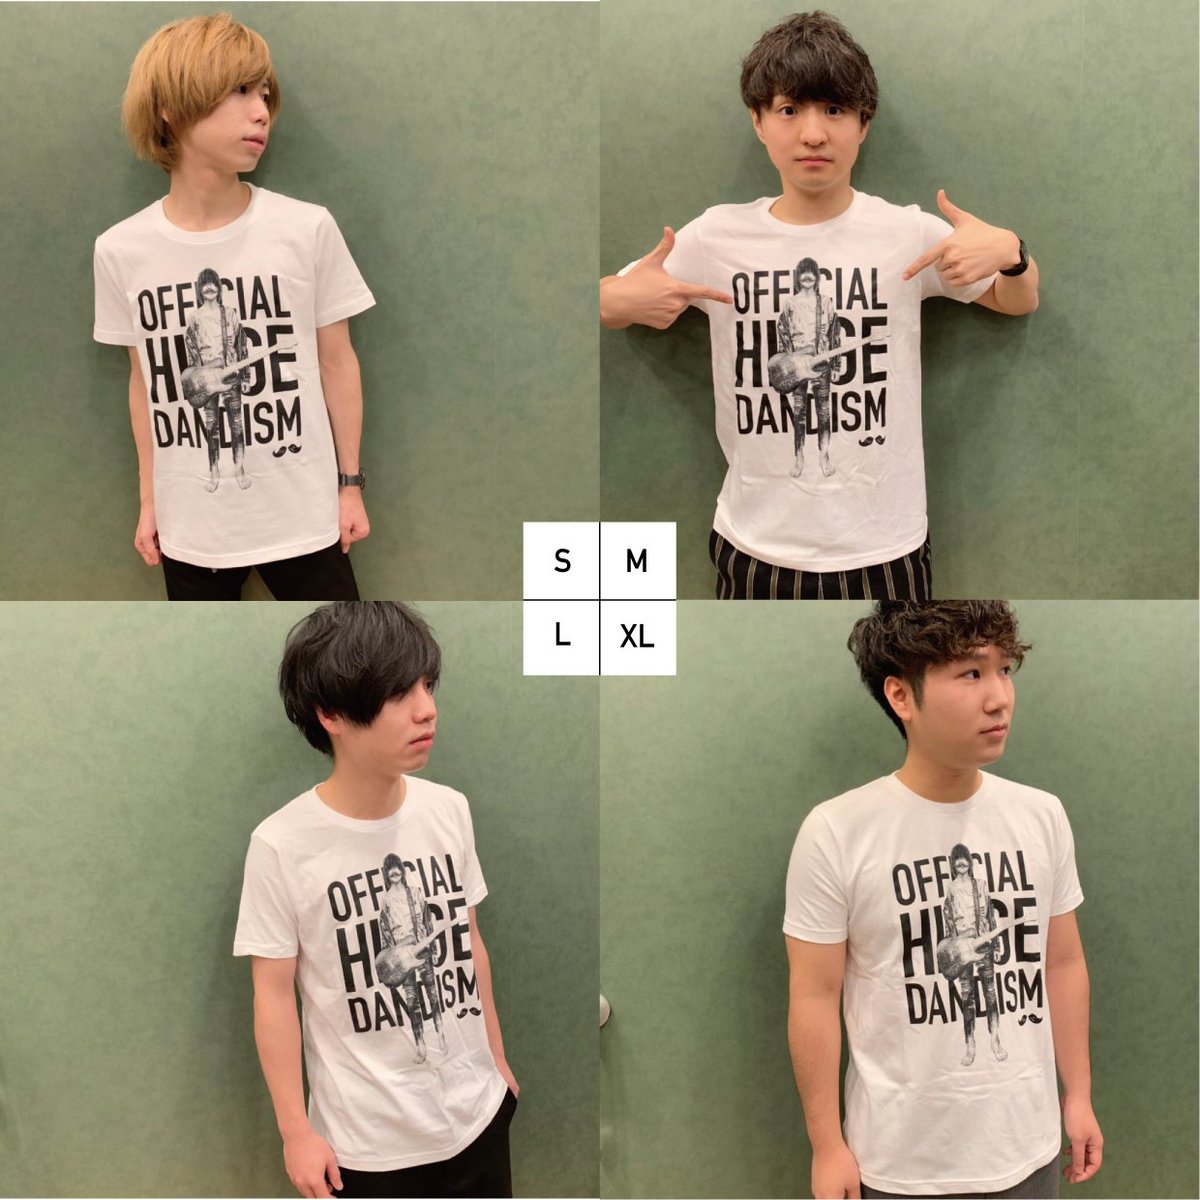 official髭男dism Tシャツ | www.myglobaltax.com